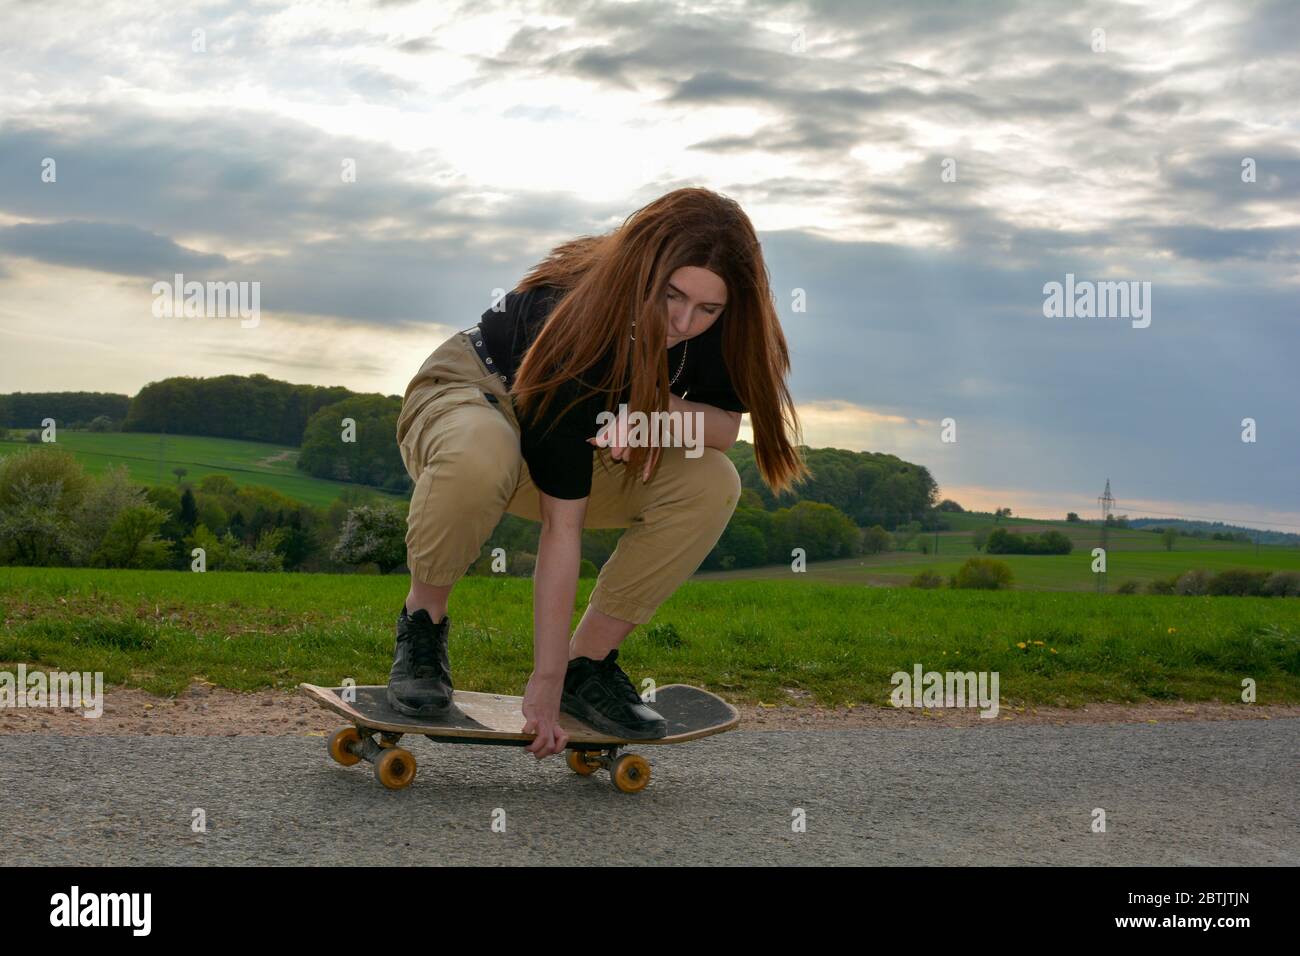 A young girl squats skateboarding on a road in green nature Stock Photo -  Alamy